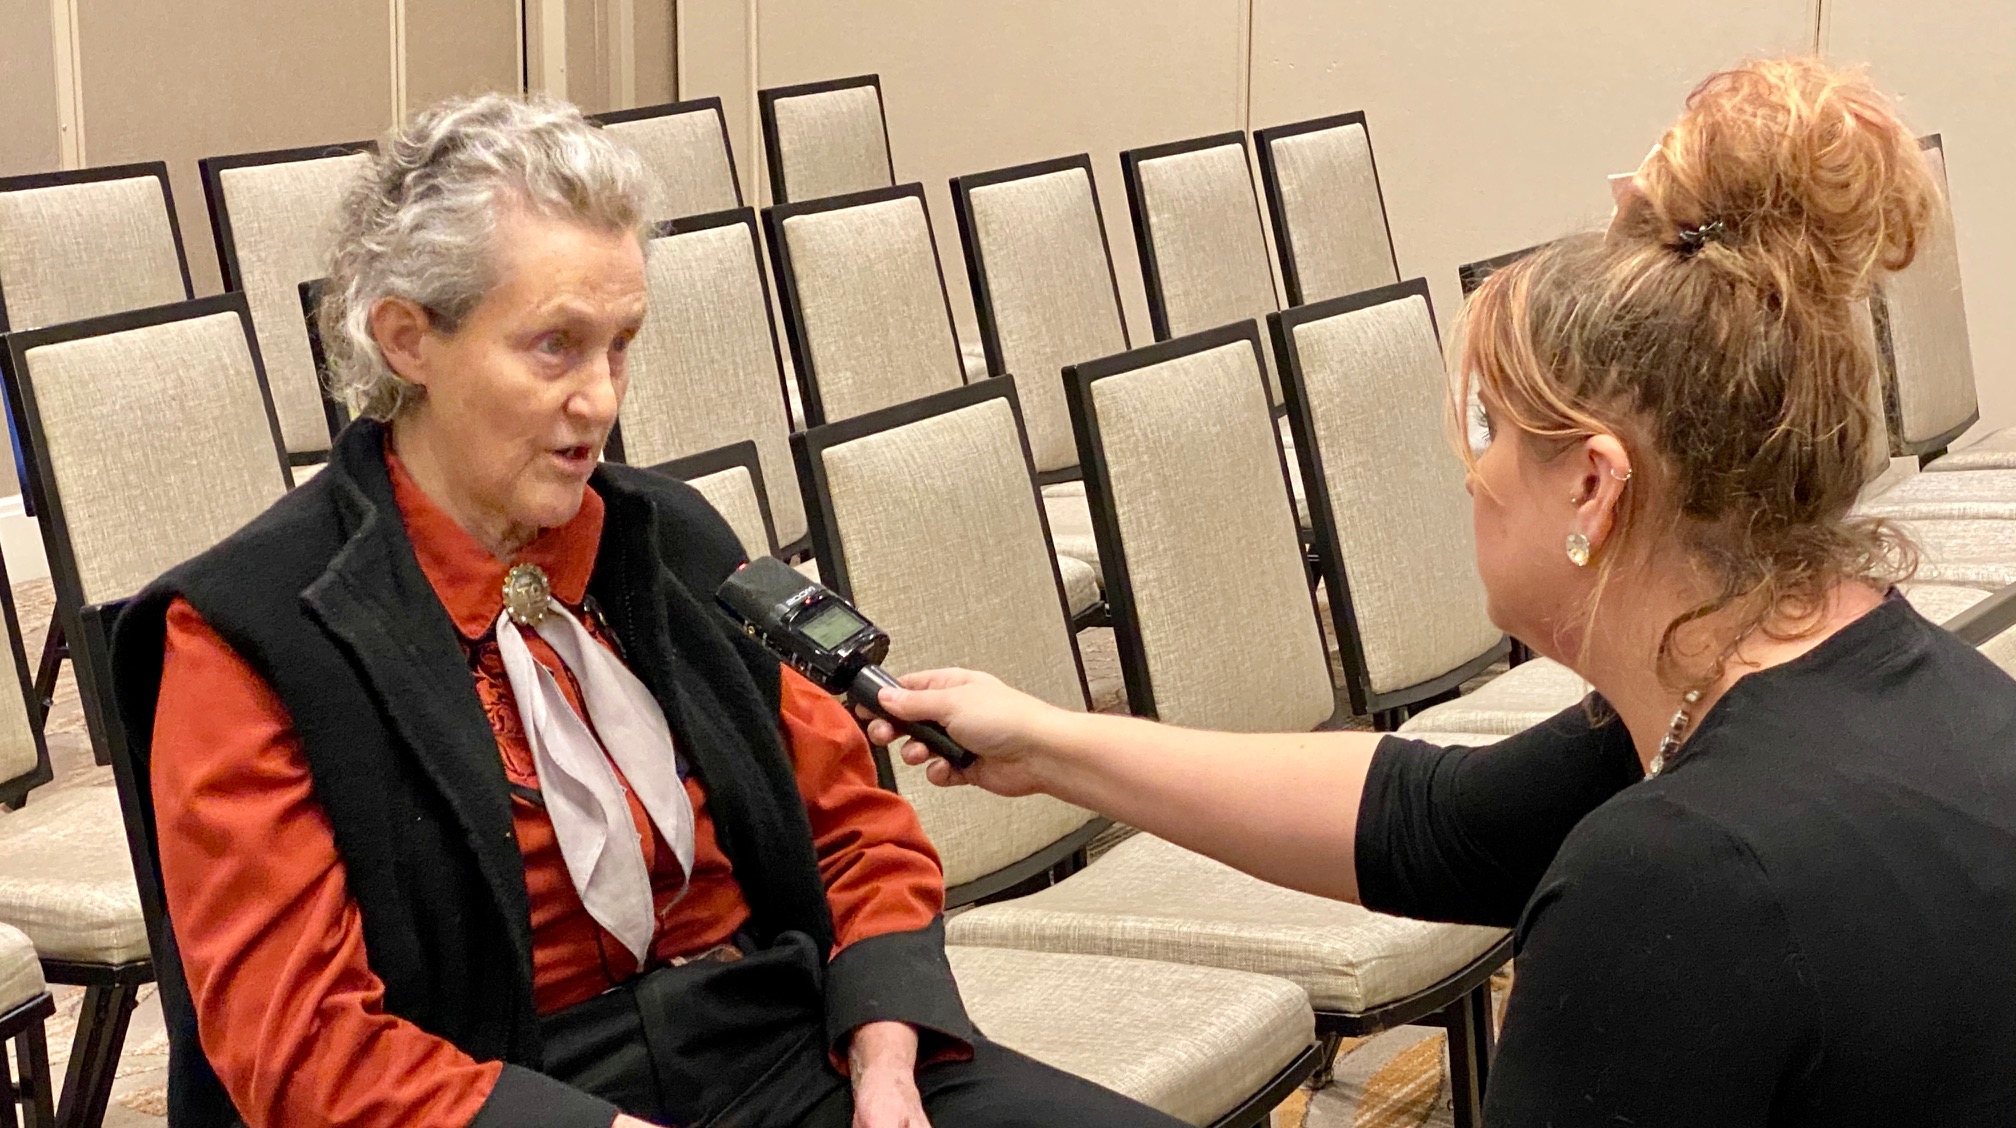 Road to Rural Prosperity Features Dr. Temple Grandin and Her Views on Cattle Sustainability, Stockmanship & Getting Ready for the Show Ring